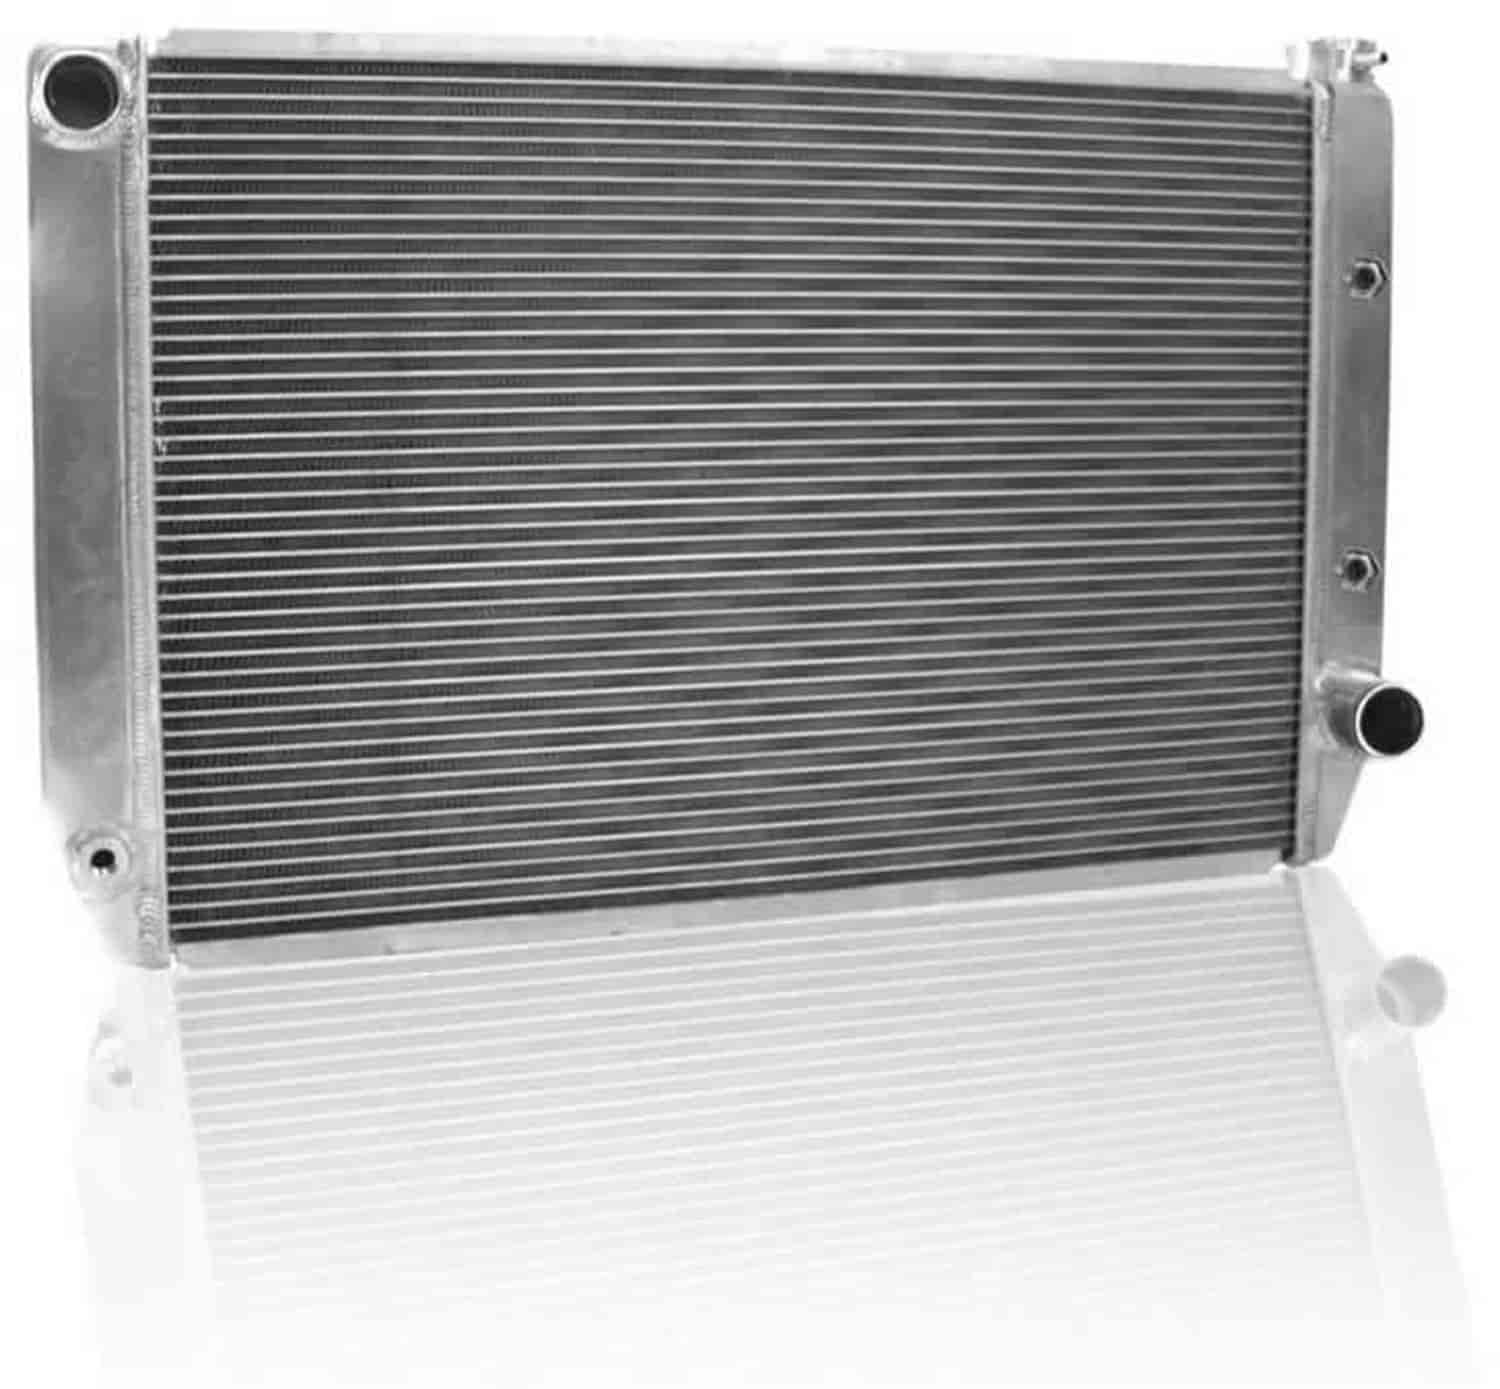 ClassicCool Universal Fit Radiator Single Pass Crossflow Design 31" x 19" with Transmission Cooler